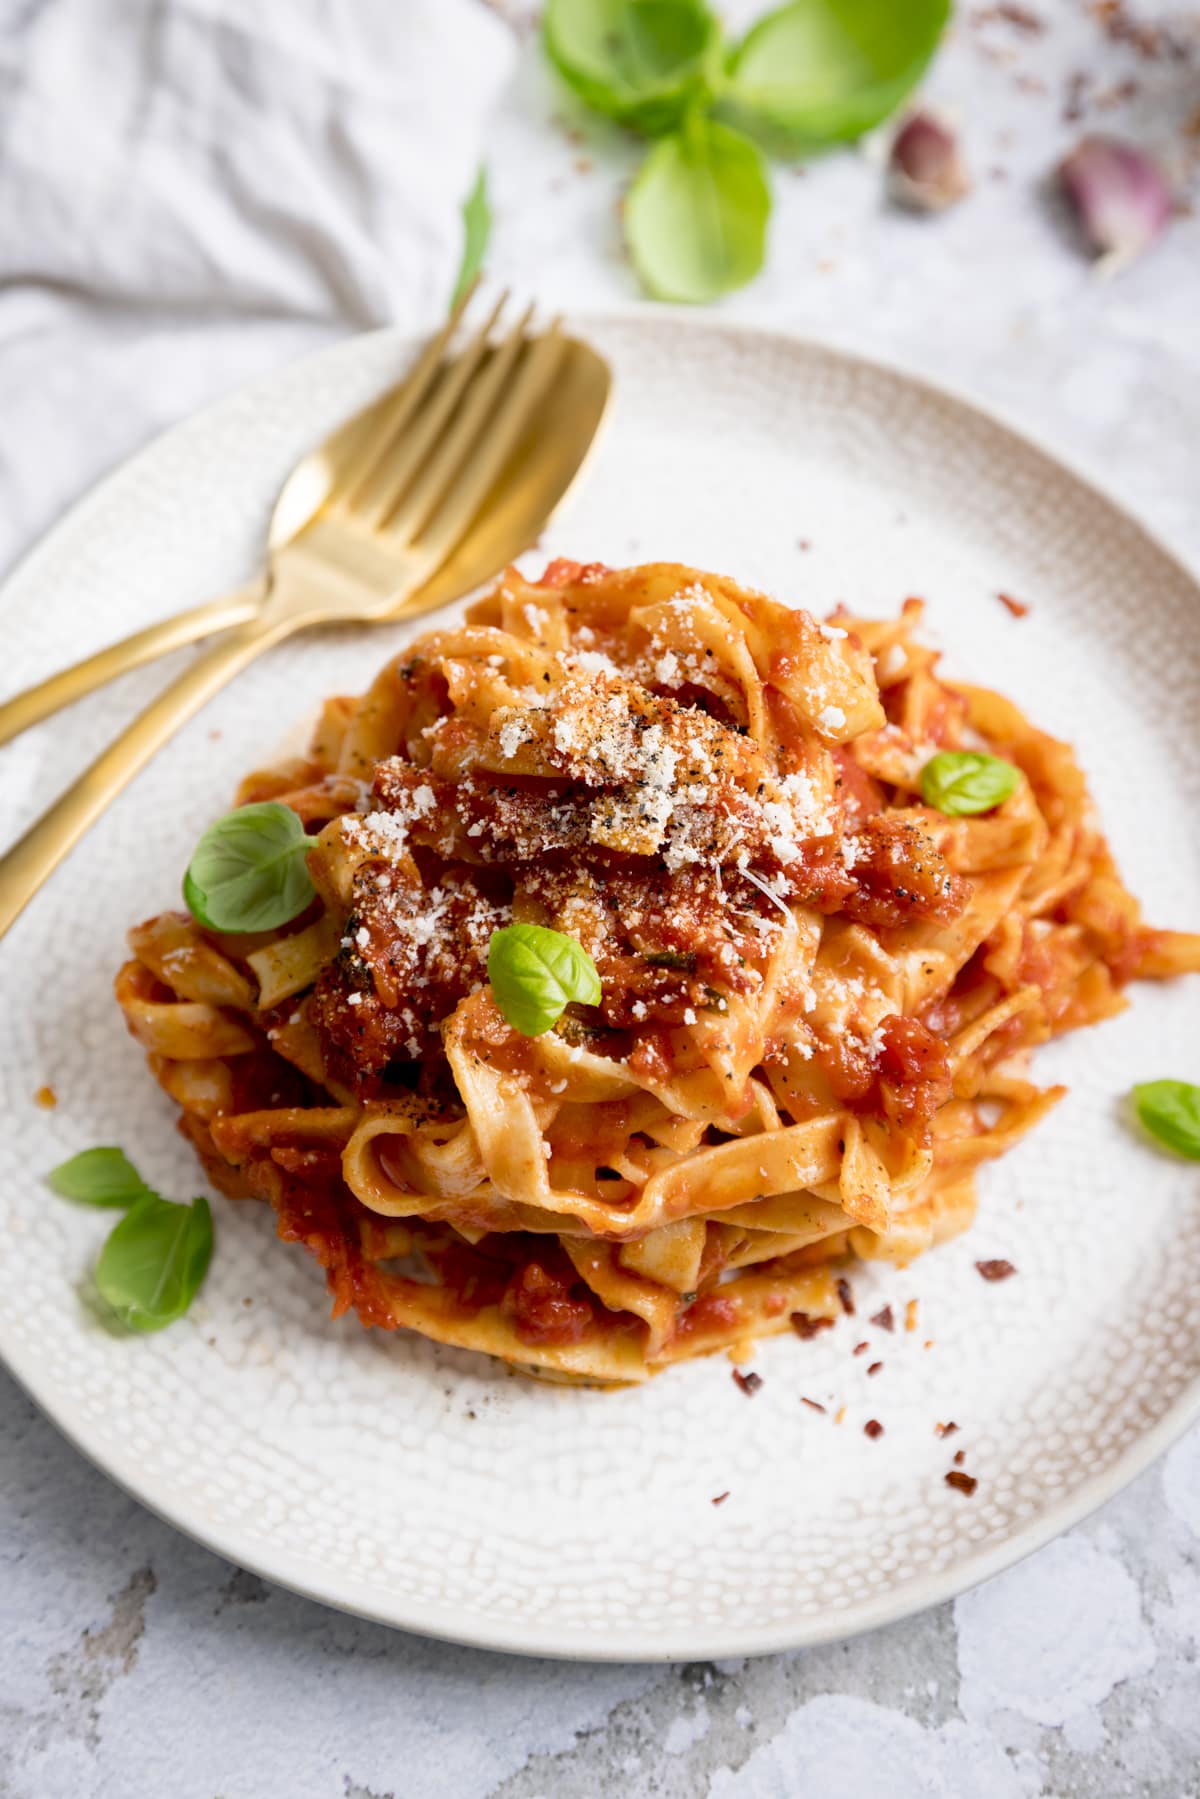 Tagliatelle in Arrabbiata sauce on a white plate on a light background. There is a gold fork and spoon on the plate and the pasta is sprinkled with parmesan, black pepper and basil leaves.